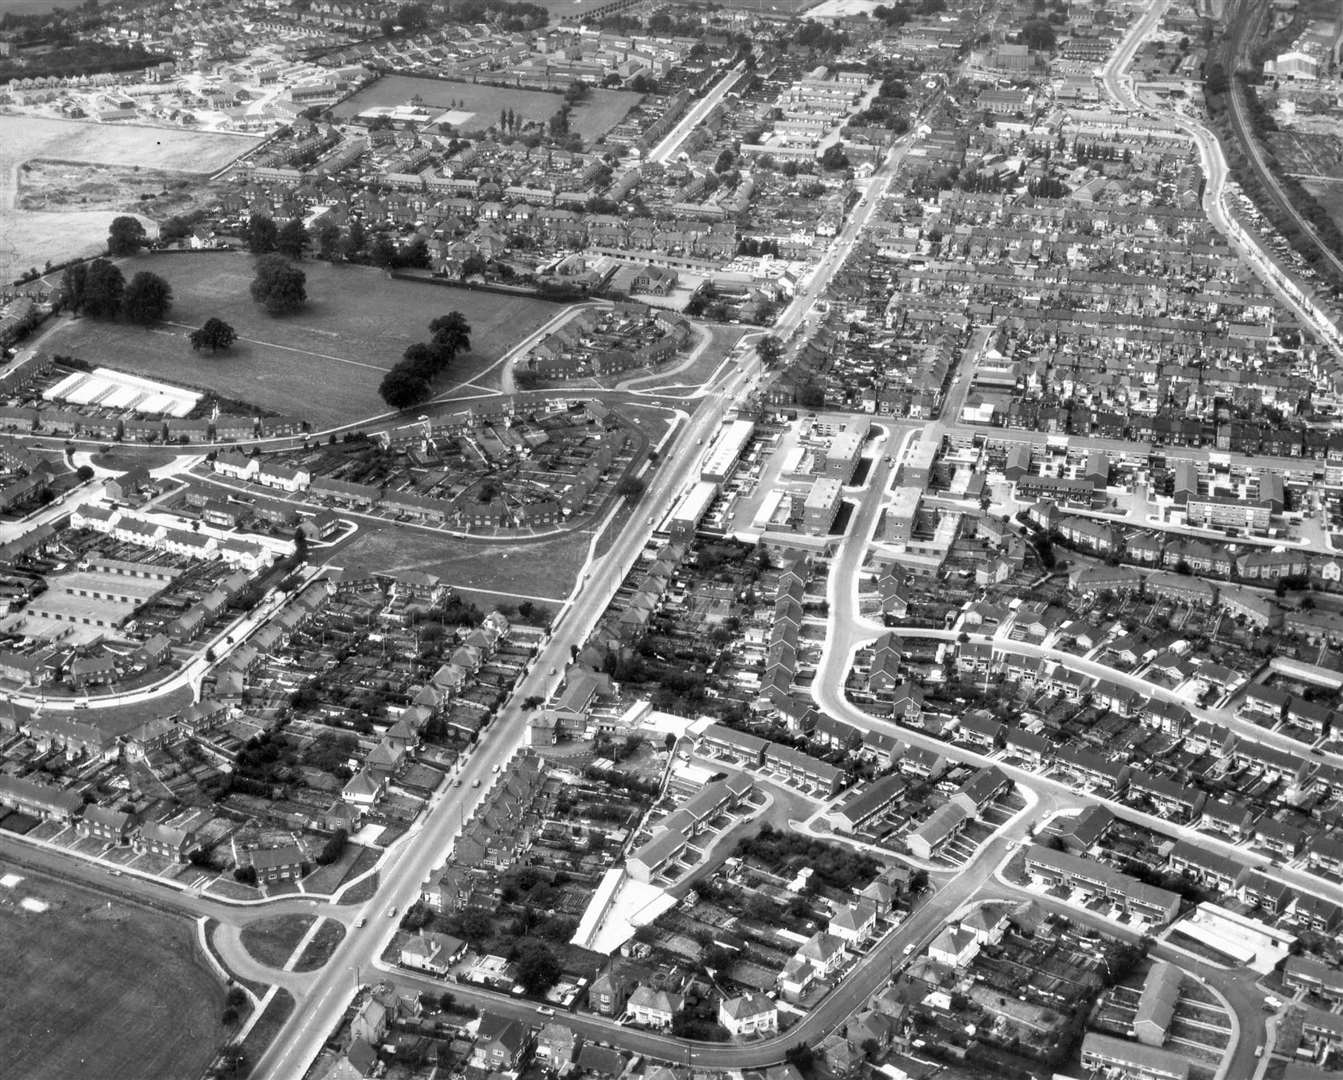 Looking down on the town in 1973